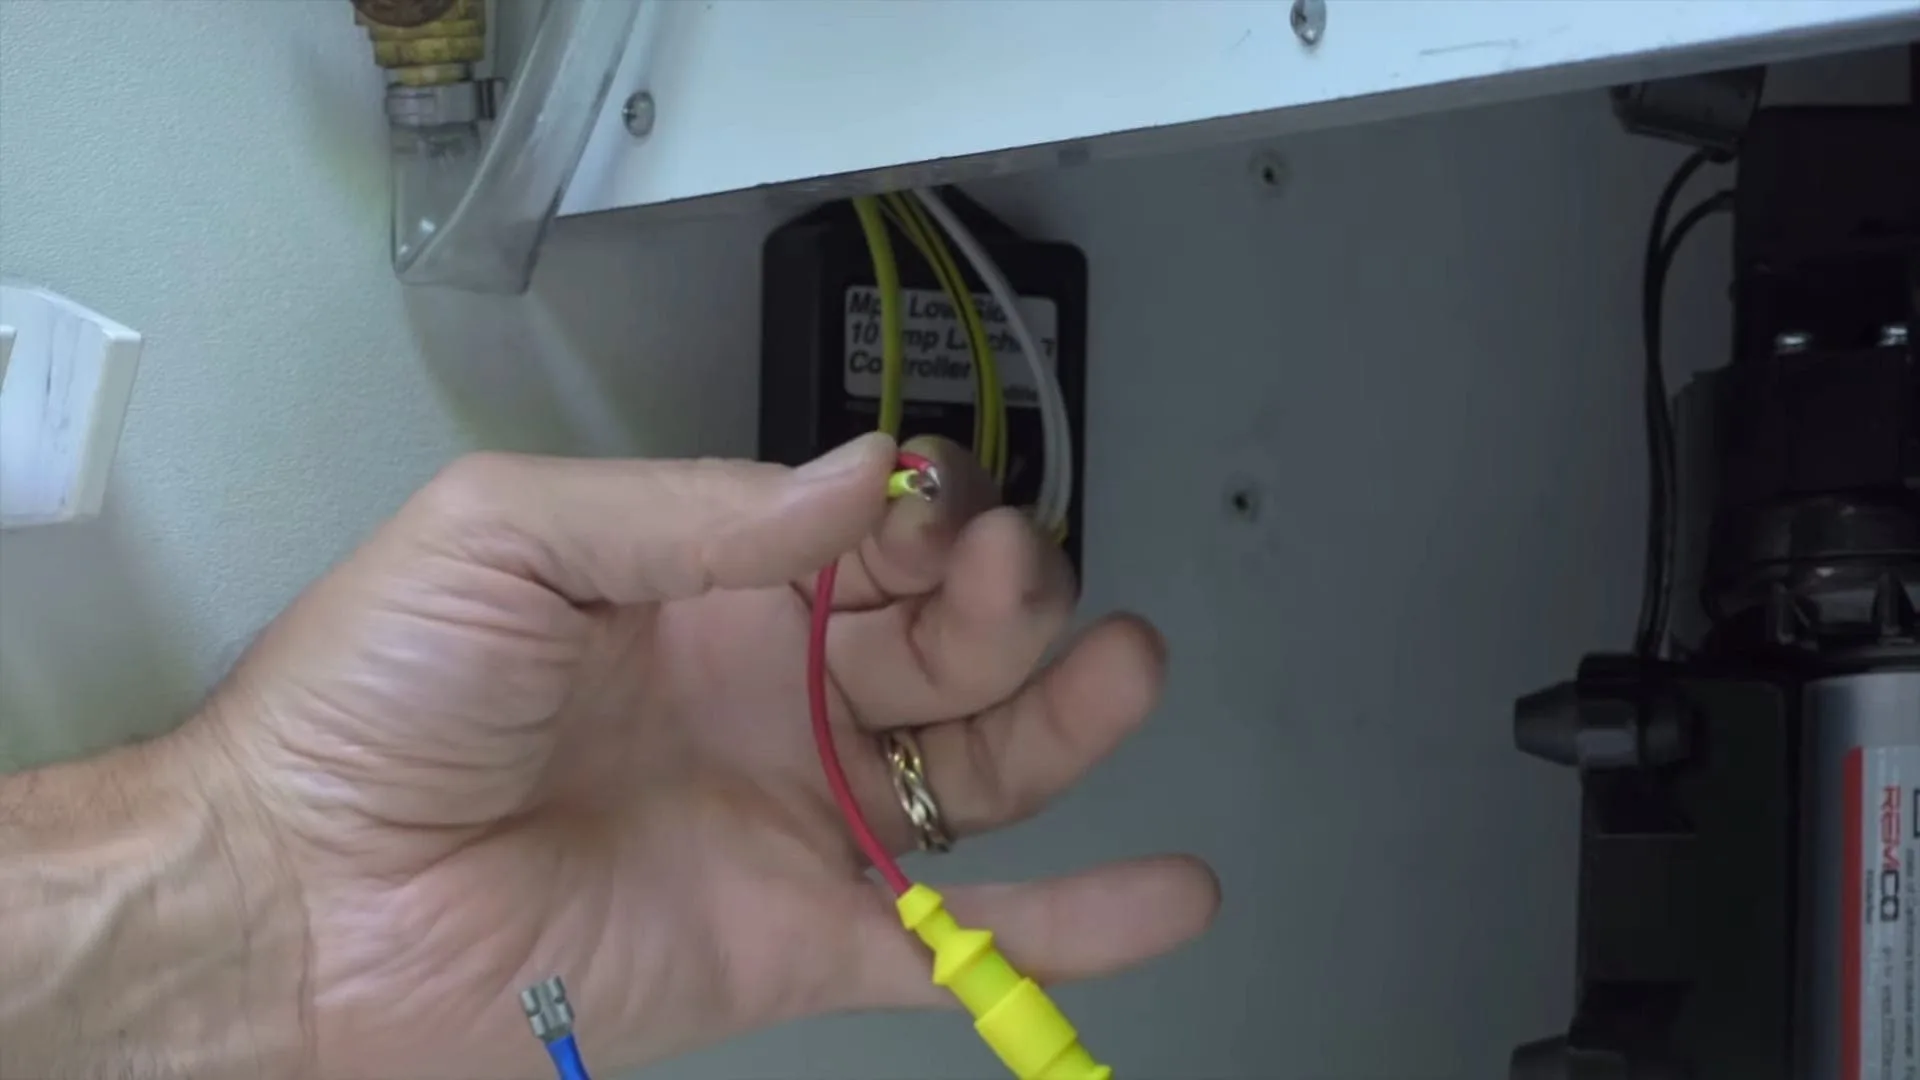 The red and yellow wires of the latching controller are crimped together.